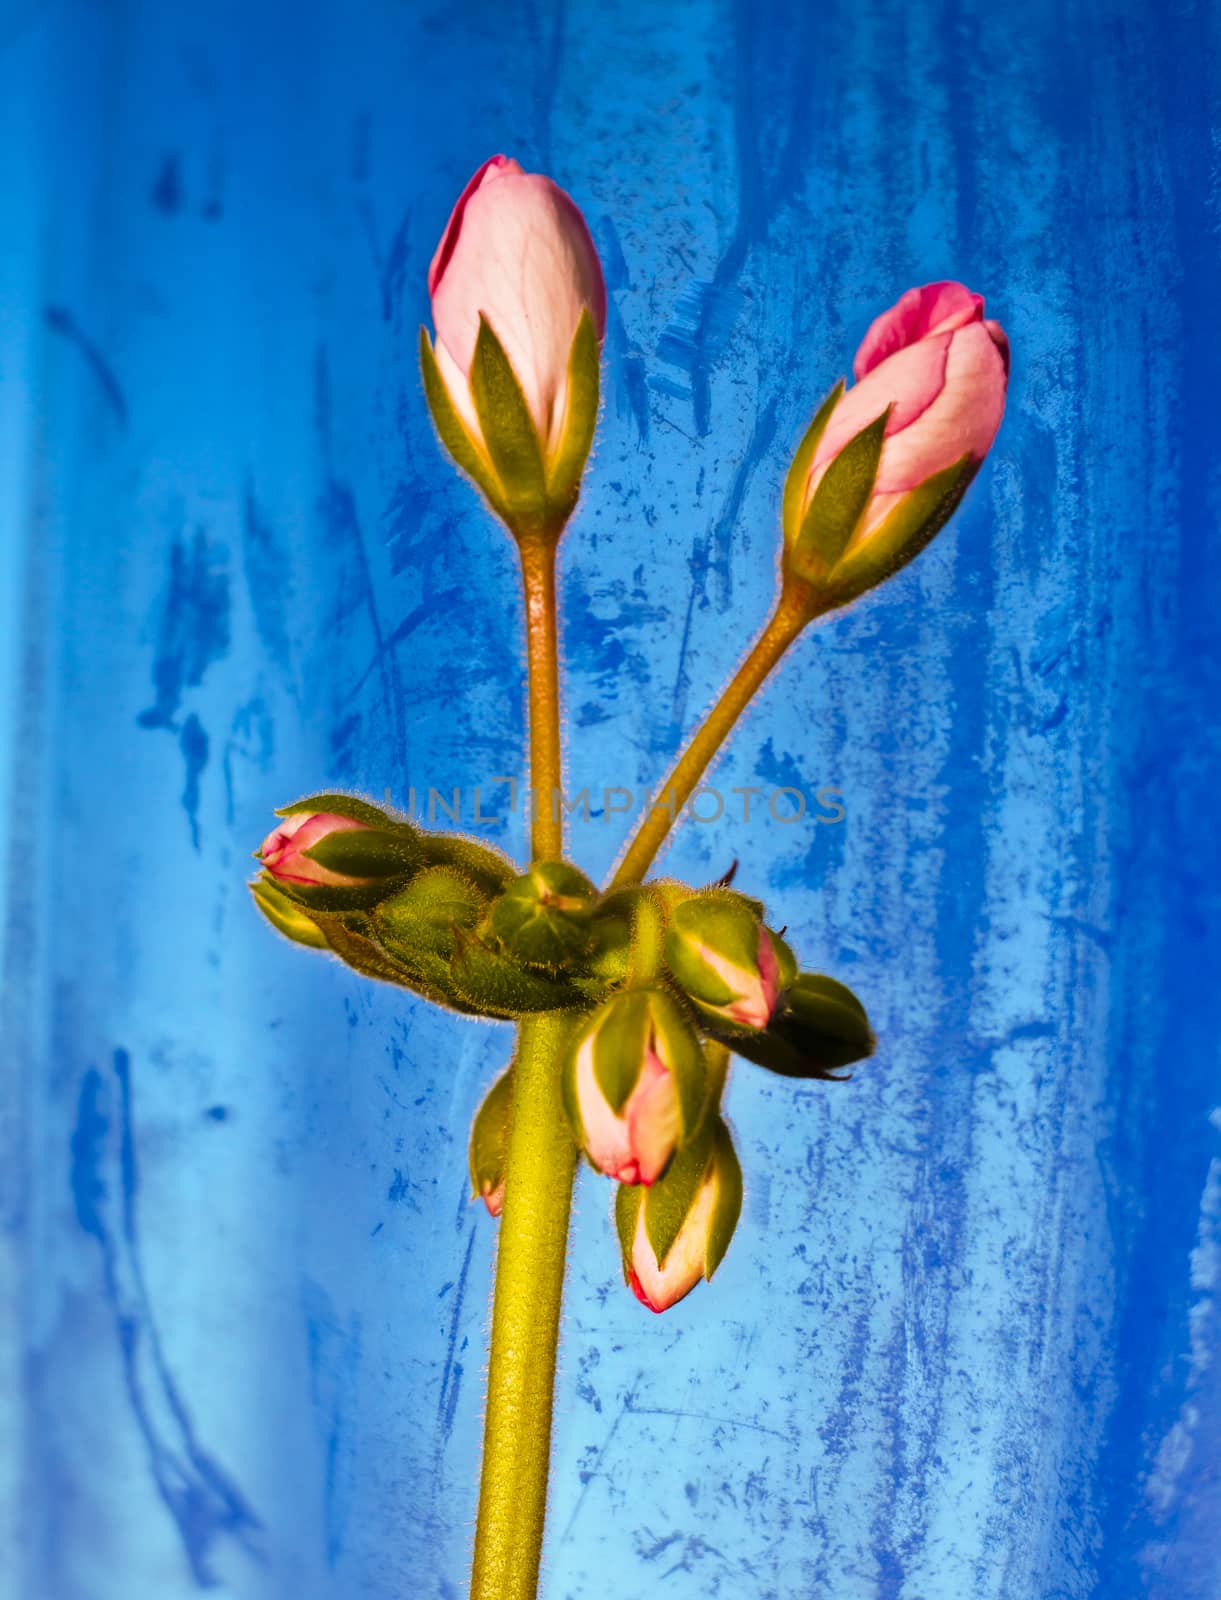 Pink flower buds about to blossom on a long stem with leaves.